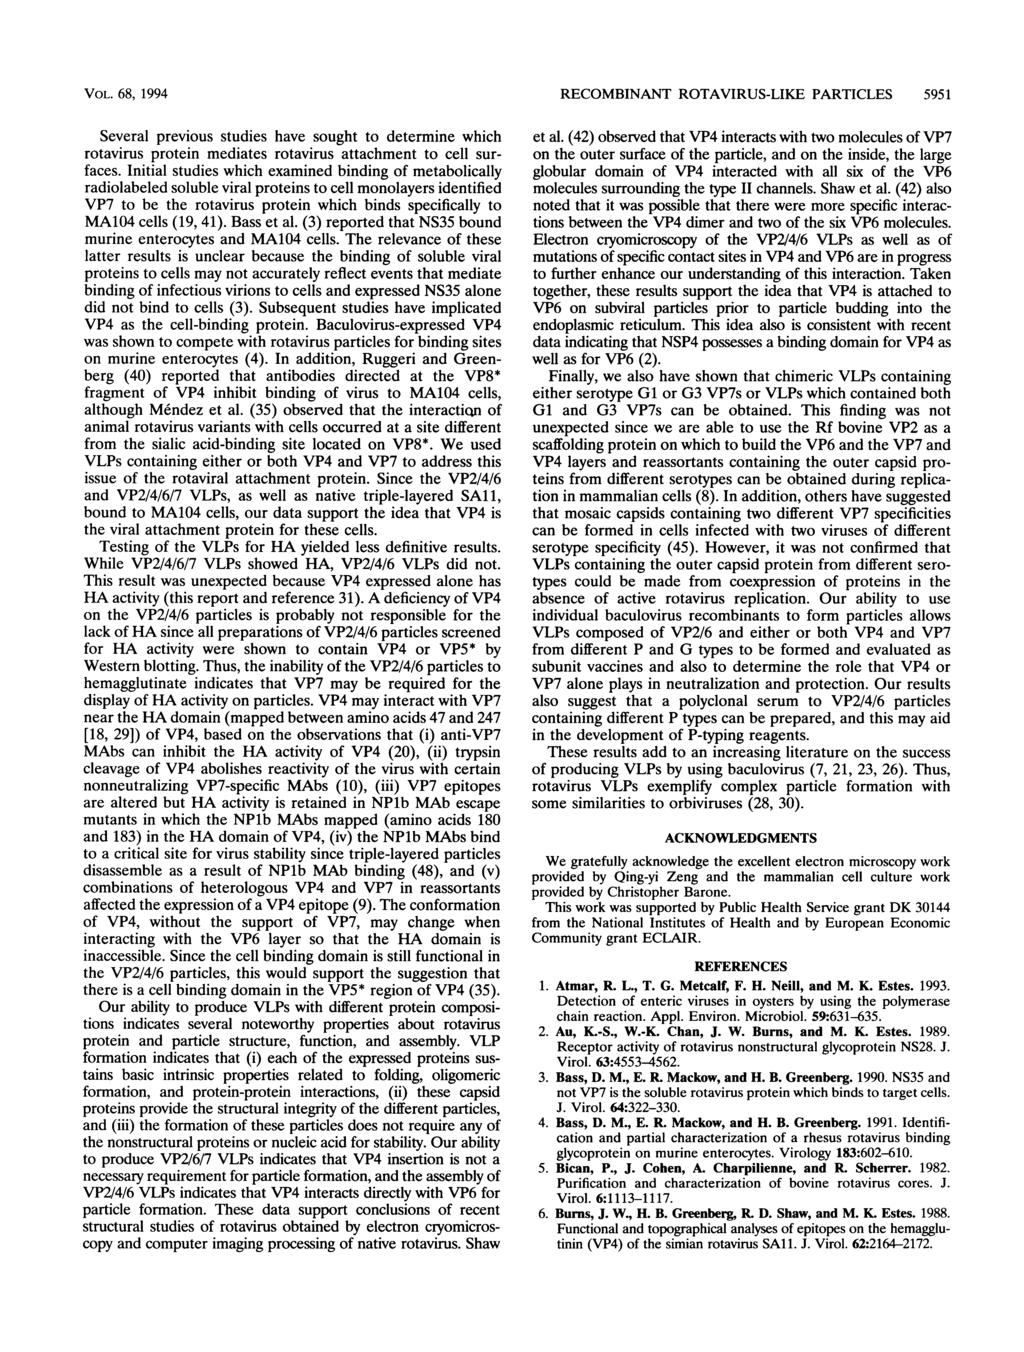 VOL. 68, 1994 Several previous studies have sought to determine which rotavirus protein mediates rotavirus attachment to cell surfaces.